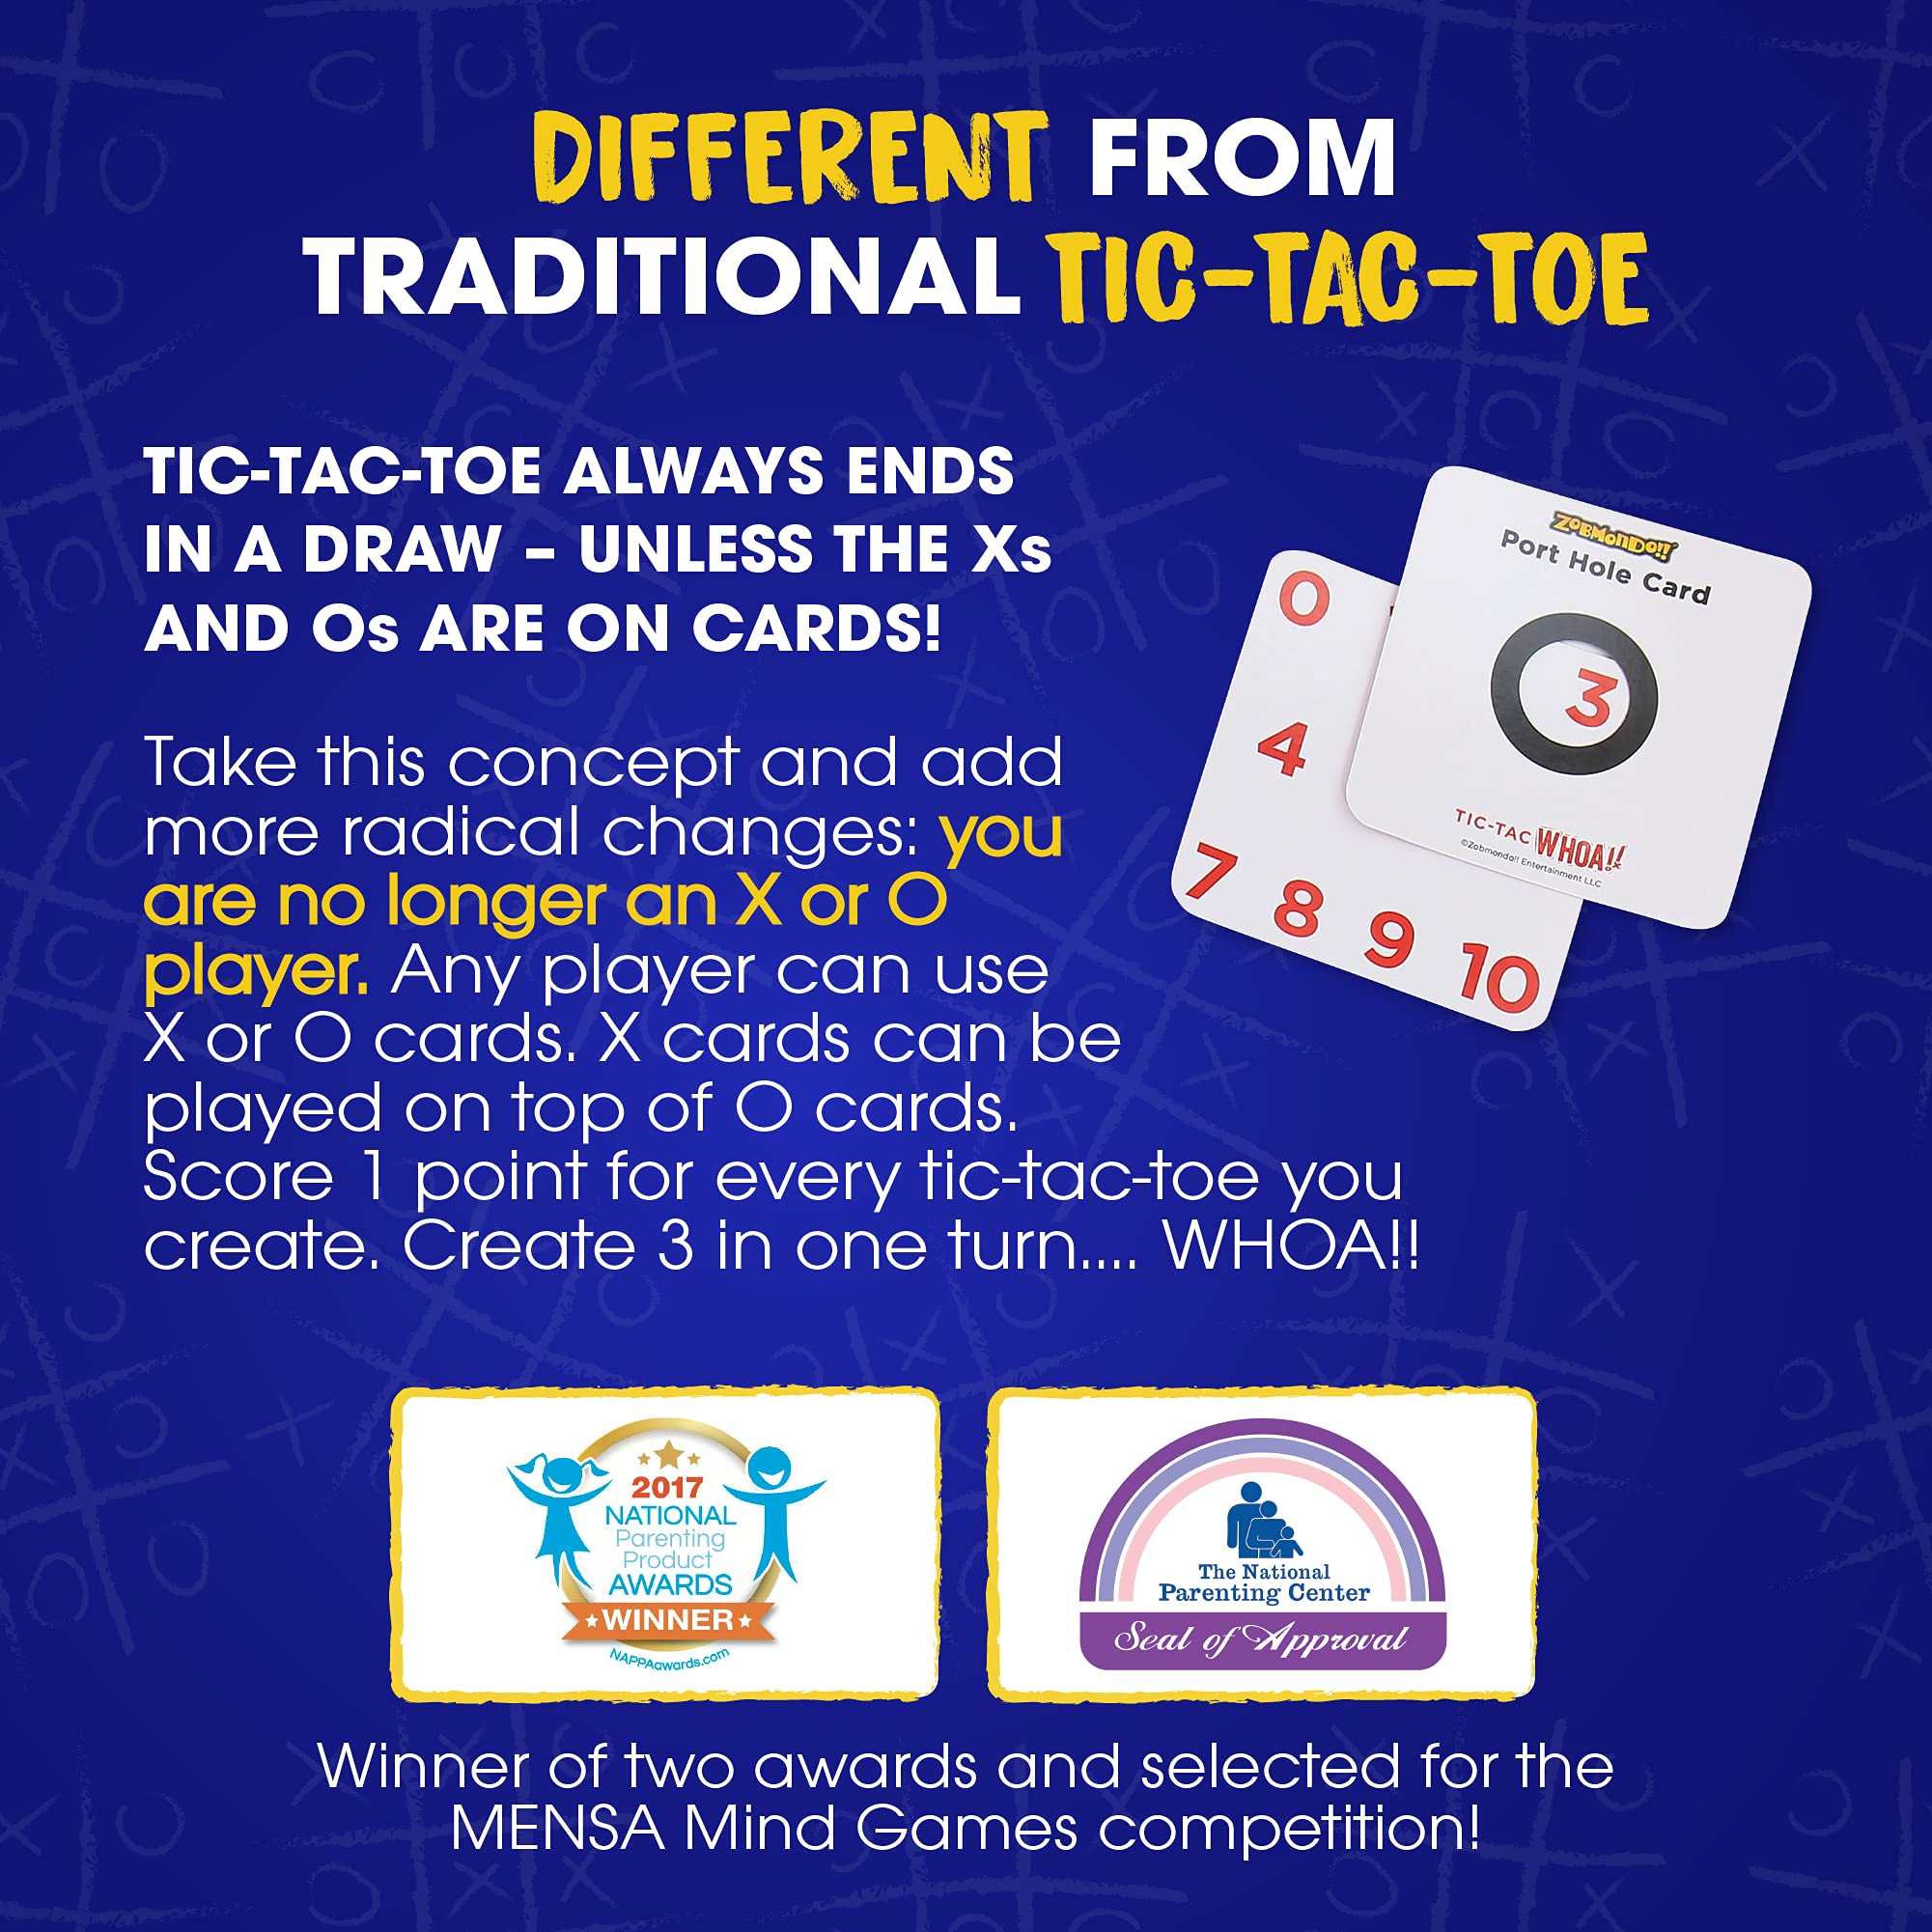 Tic Tac Whoa!! 5-in-1 Tic Tac Toe Card Game by Zobmondo!! | Fun for Families and-Kids